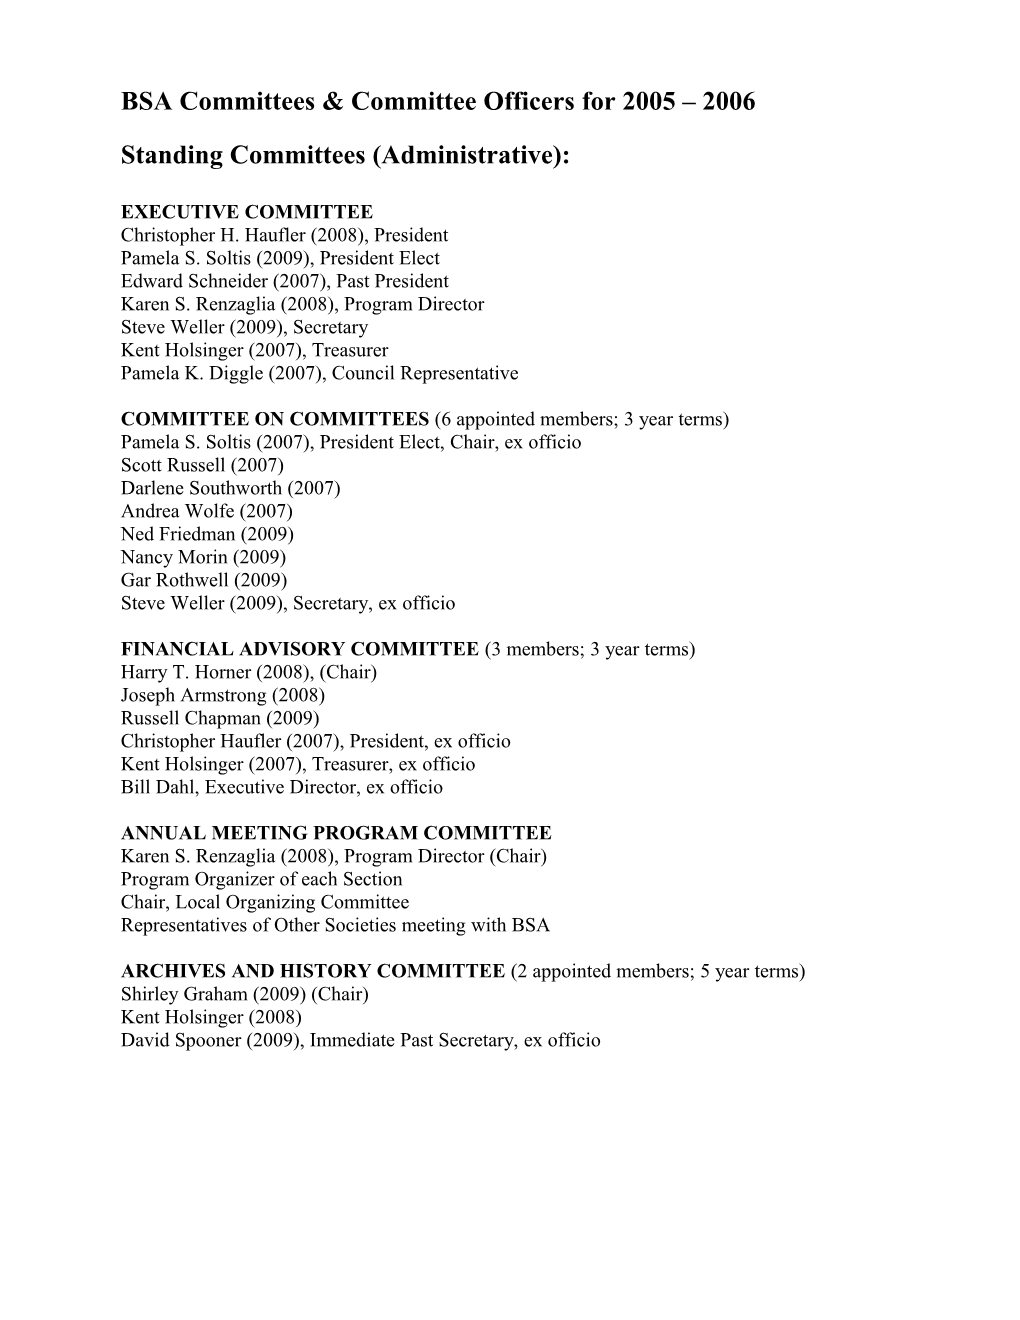 BSA Committees & Committee Officers for 2005 - 2006